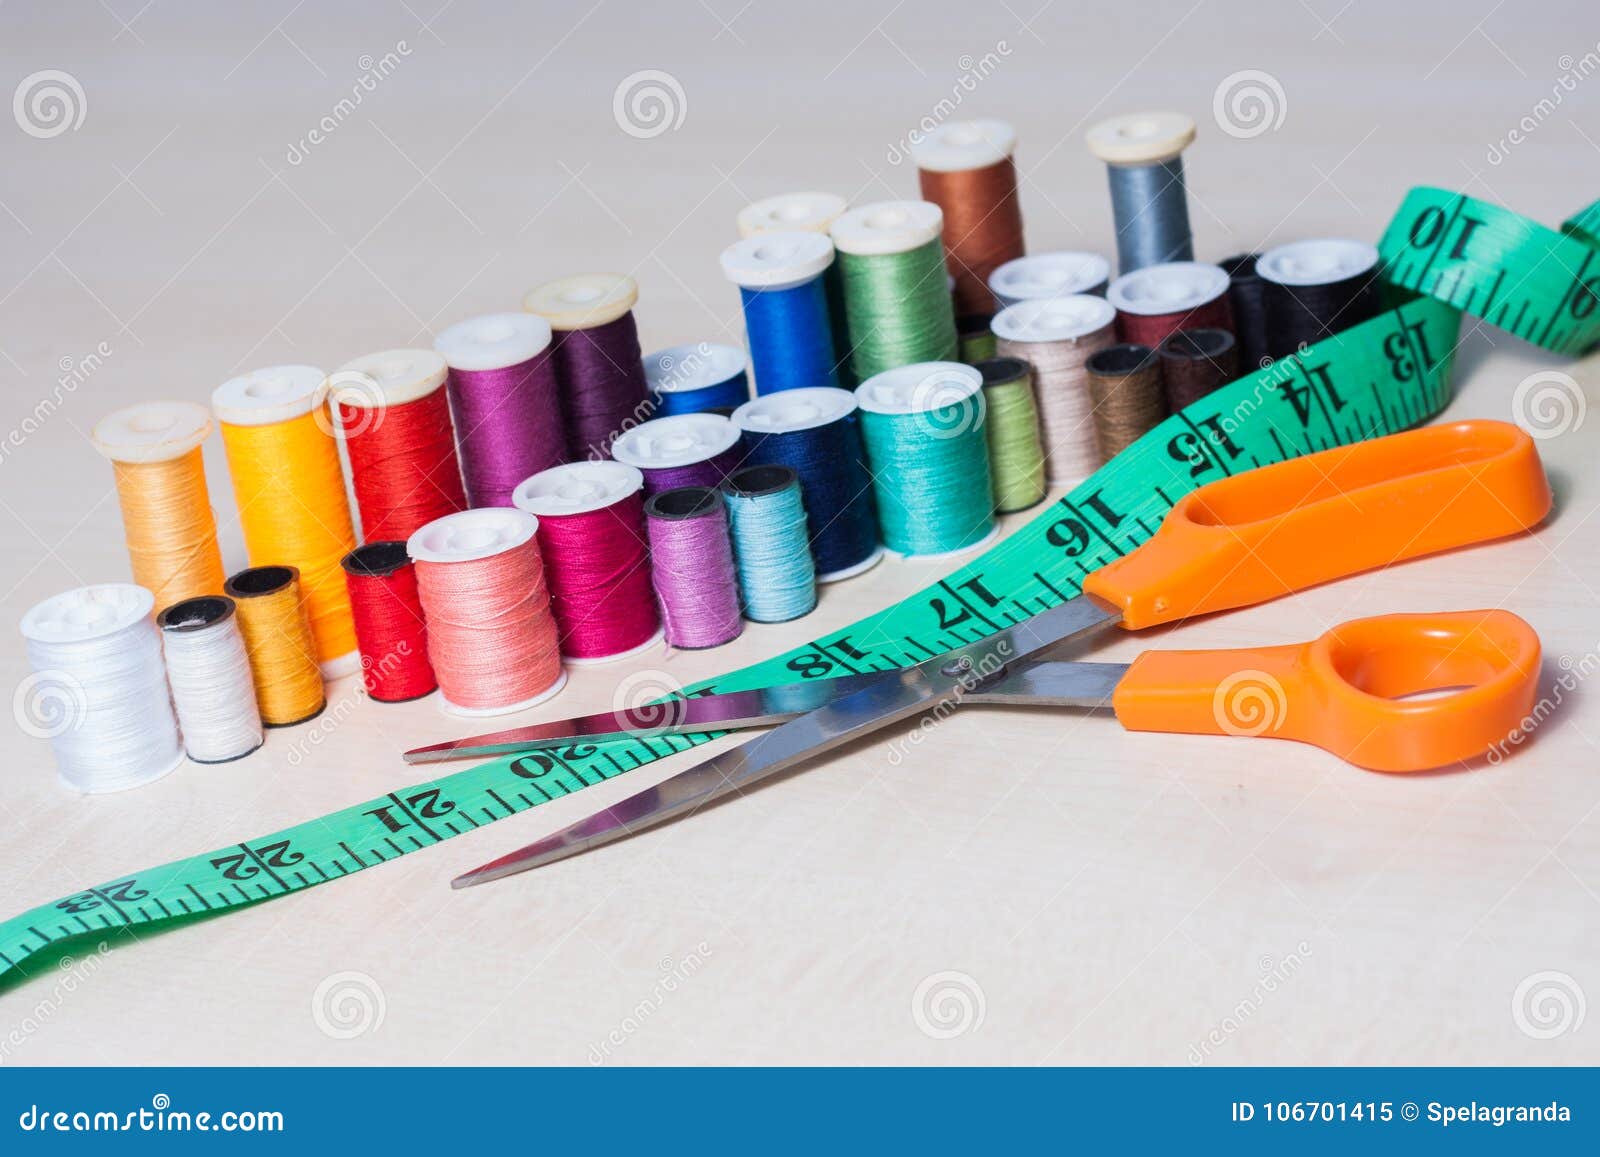 Colourful Collection of Sewing Accessories Stock Image - Image of ...